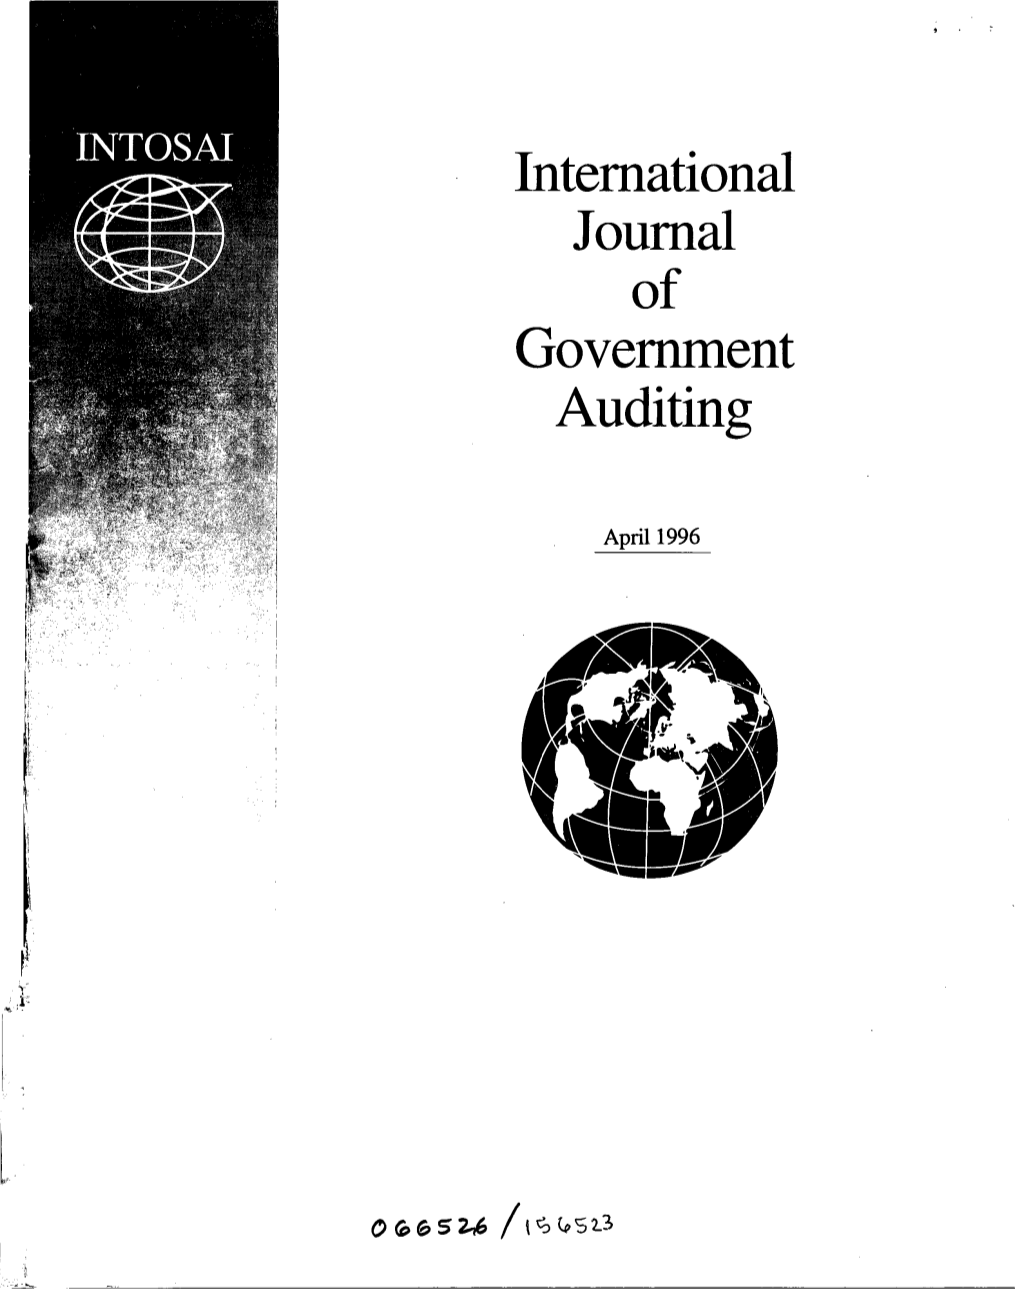 International Journal of Government Auditing, April 1996, Vol. 23, No. 2